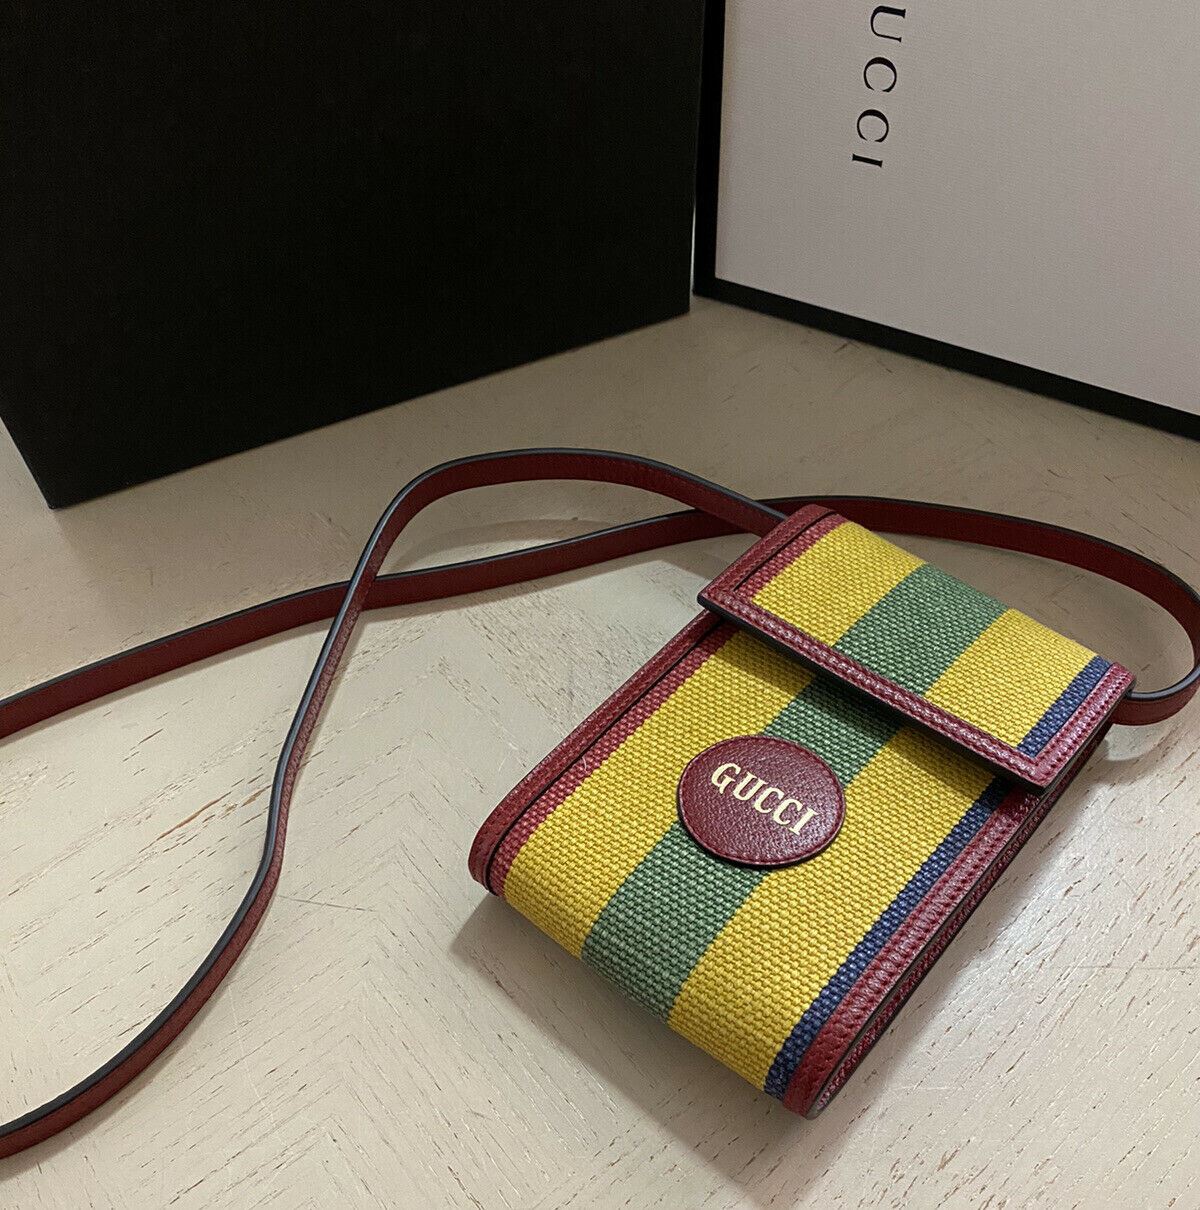 New Gucci Canvas/Leather Phone Case Crossbody Bag Shoulder Bag Red/Yellow/Green